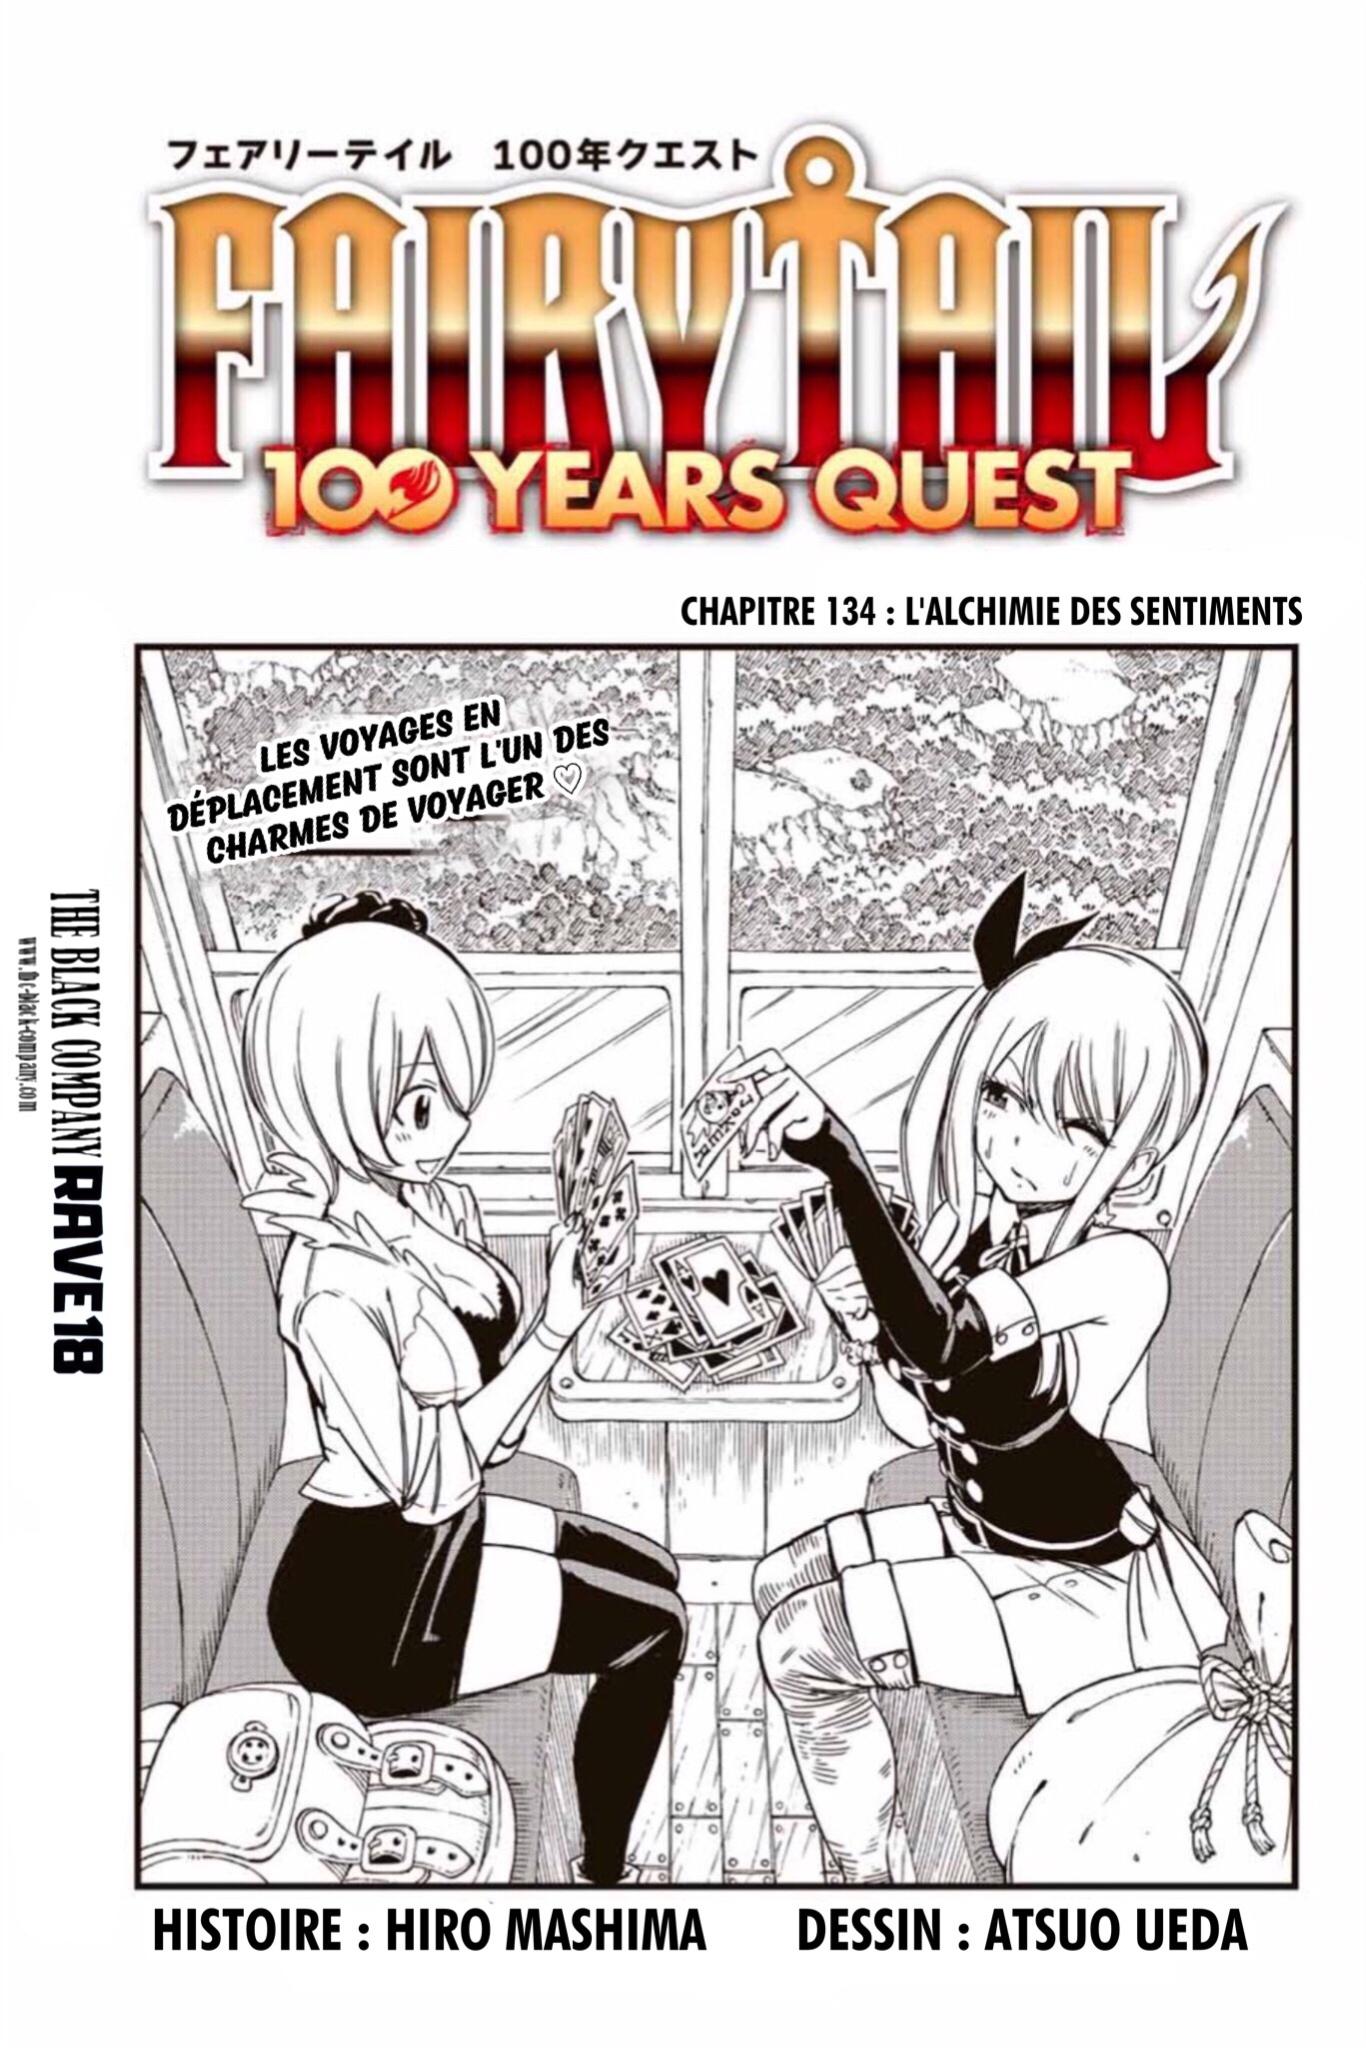     Fairy Tail 100 Years Quest 134 Page 1